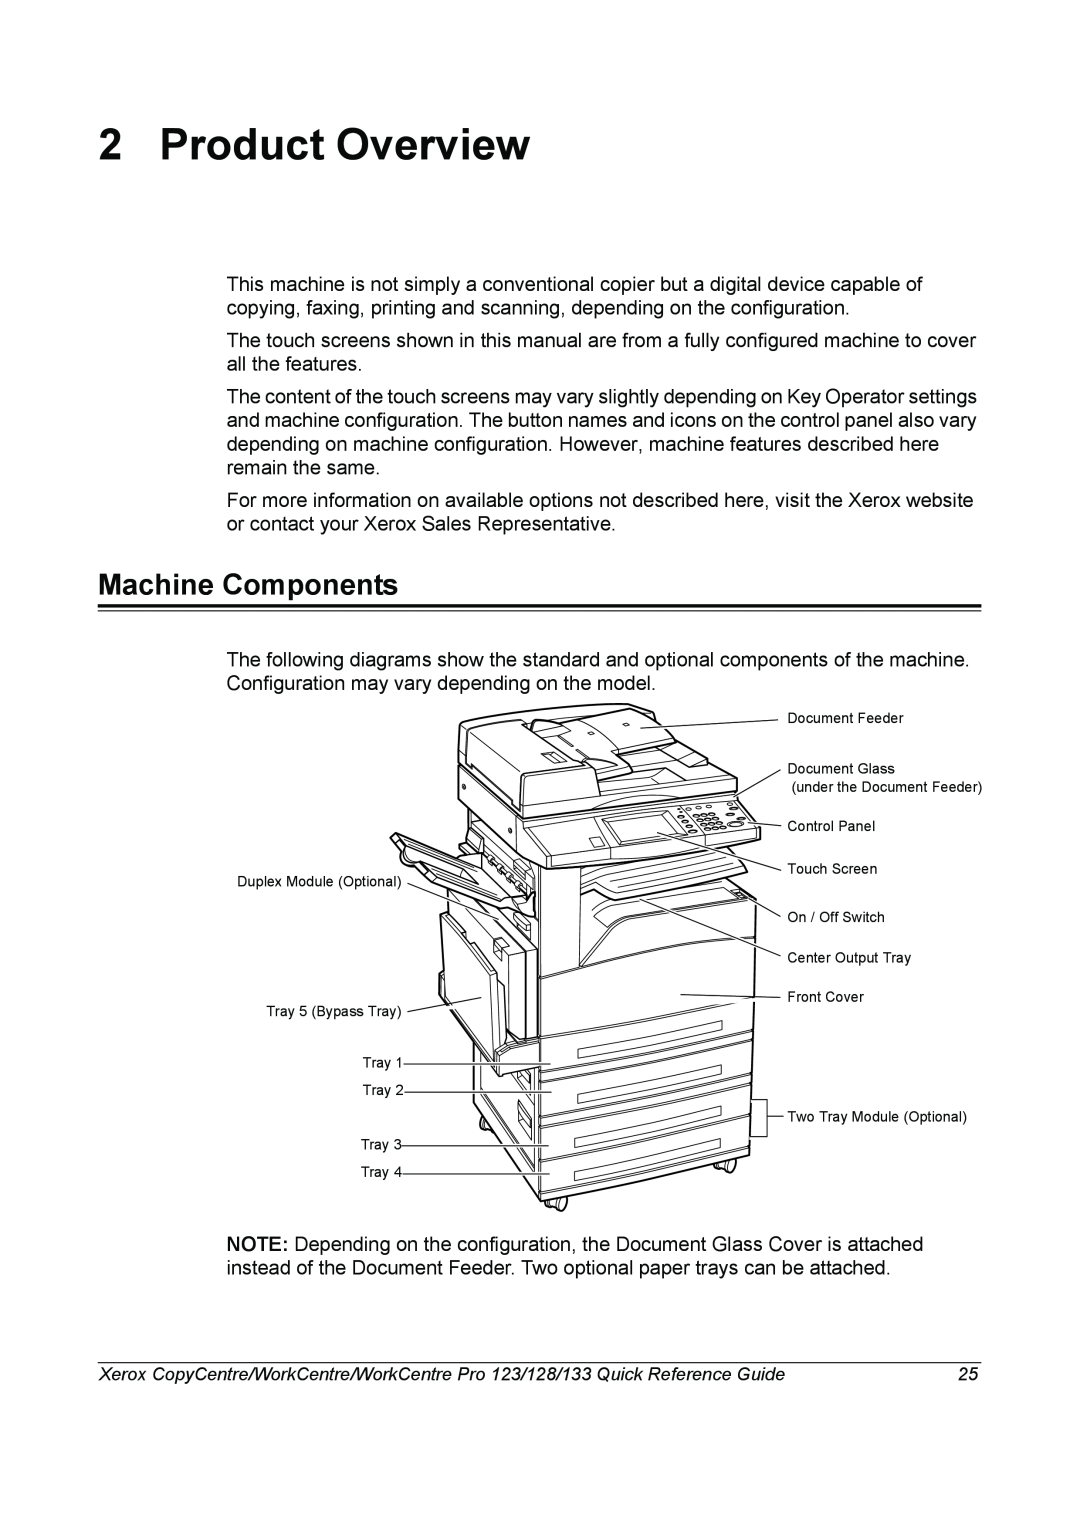 Xerox 604P18037 manual Product Overview, Machine Components 